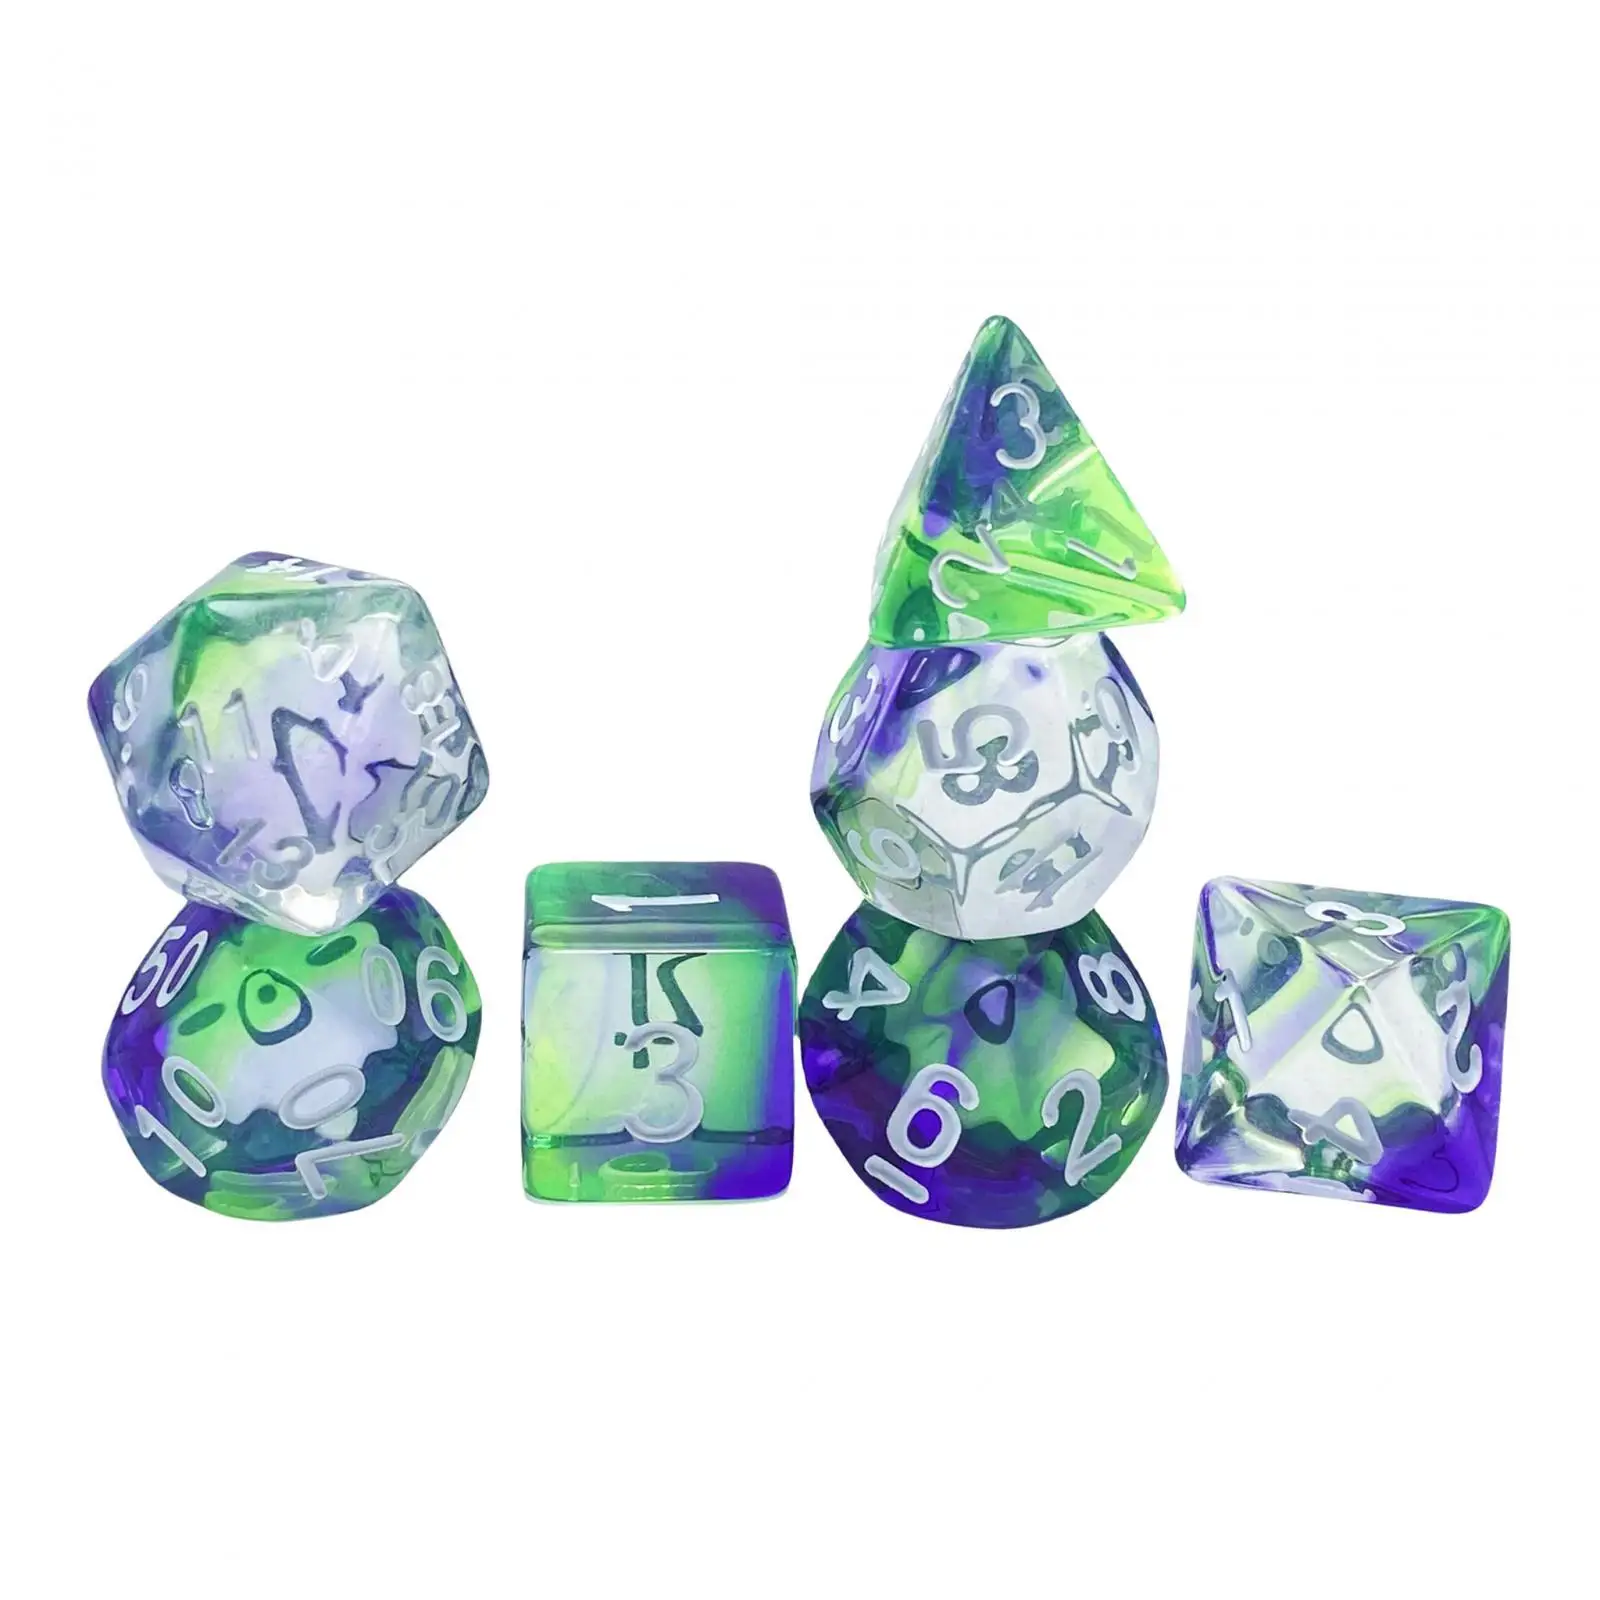 7x Multi Sided Dices Entertainment Toys Polyhedral Dices Acrylic Dices for Party Game Card Game Role Playing Game Board Game